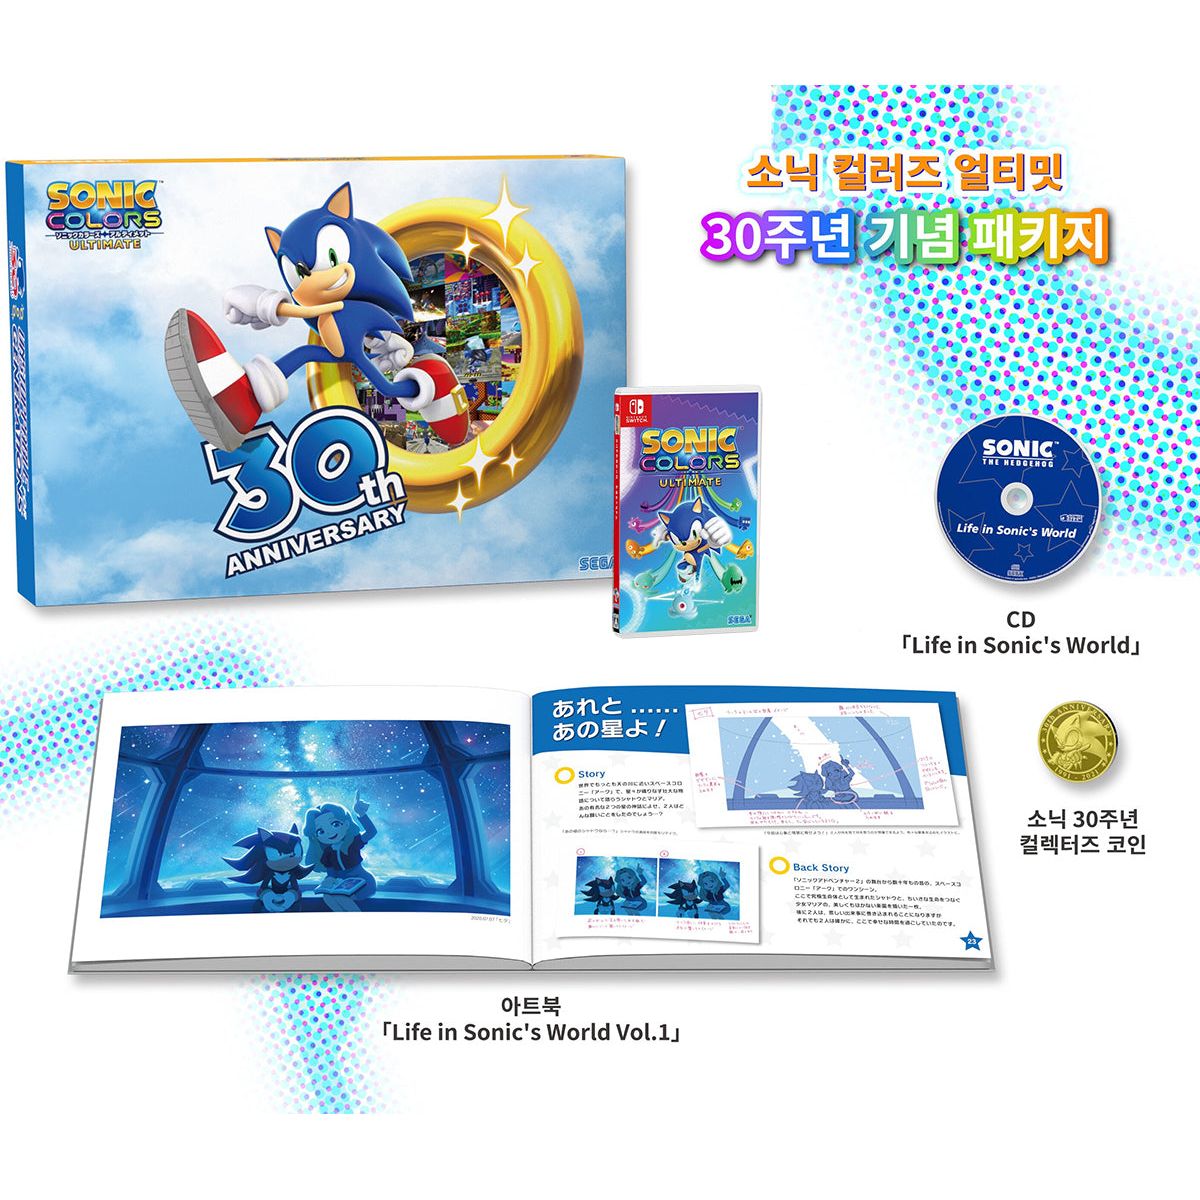 Sonic Colors Ultimate 30th Anniversary Limited Edition NSW